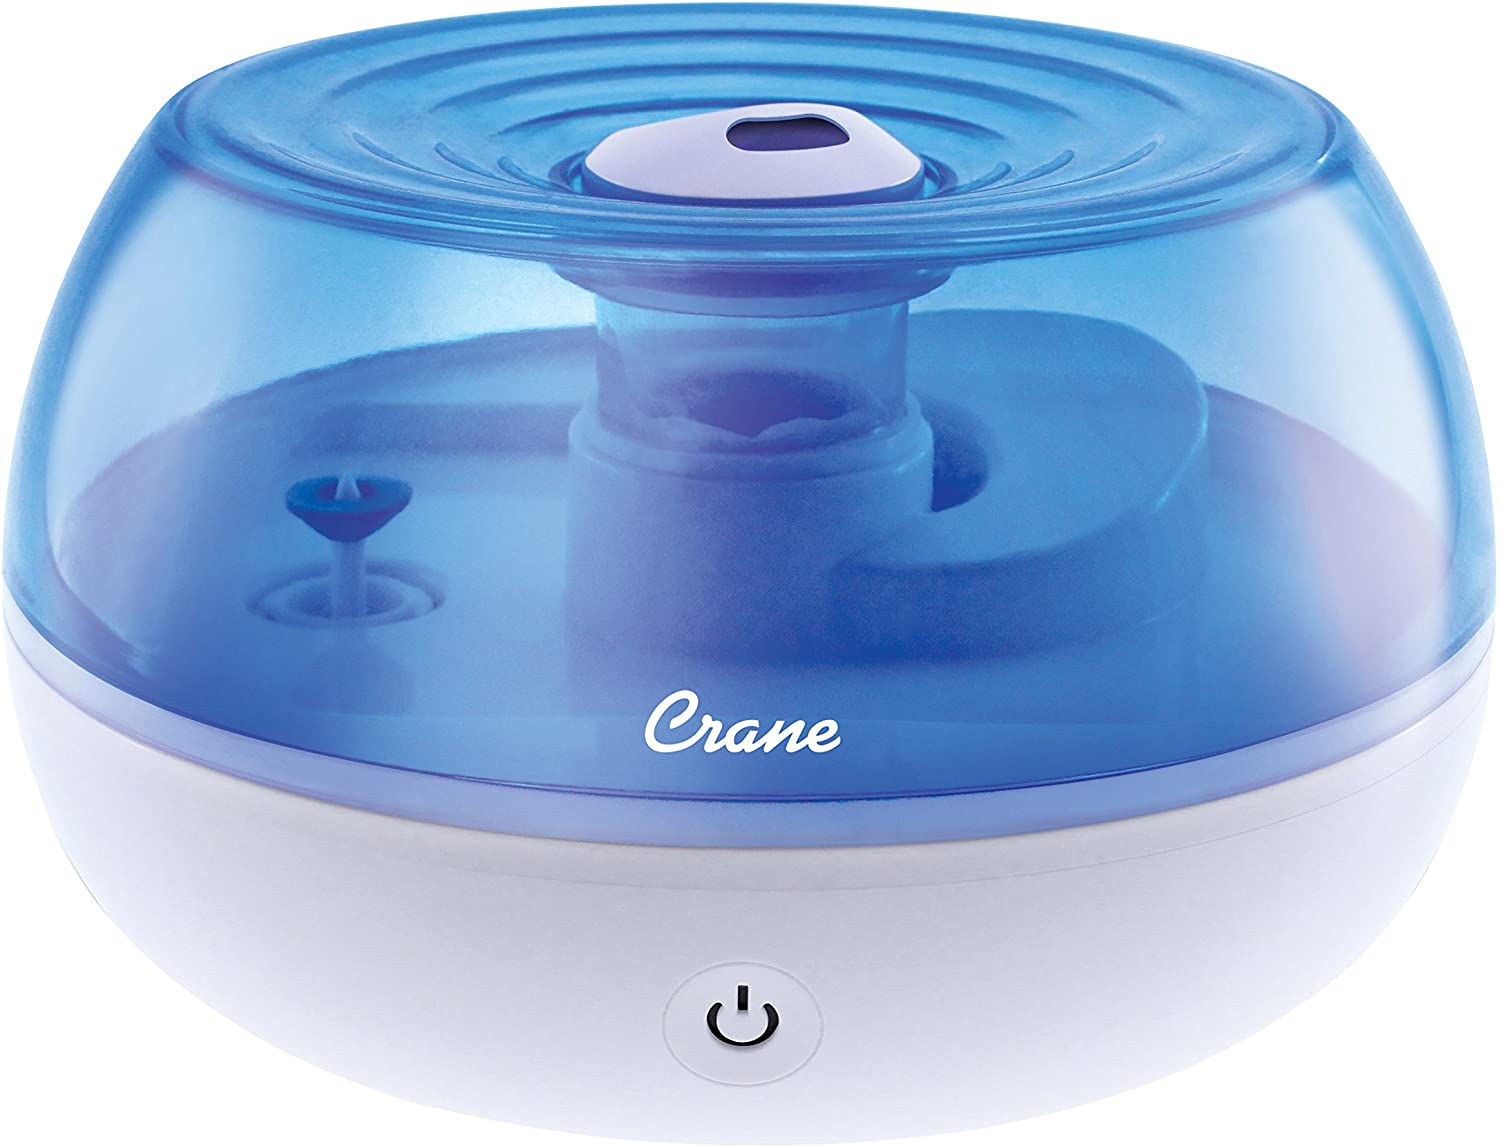 0.2 Gallon Crane Personal Ultrasonic Cool Mist Humidifier $12 + free shipping w/ Prime or on orders over $25